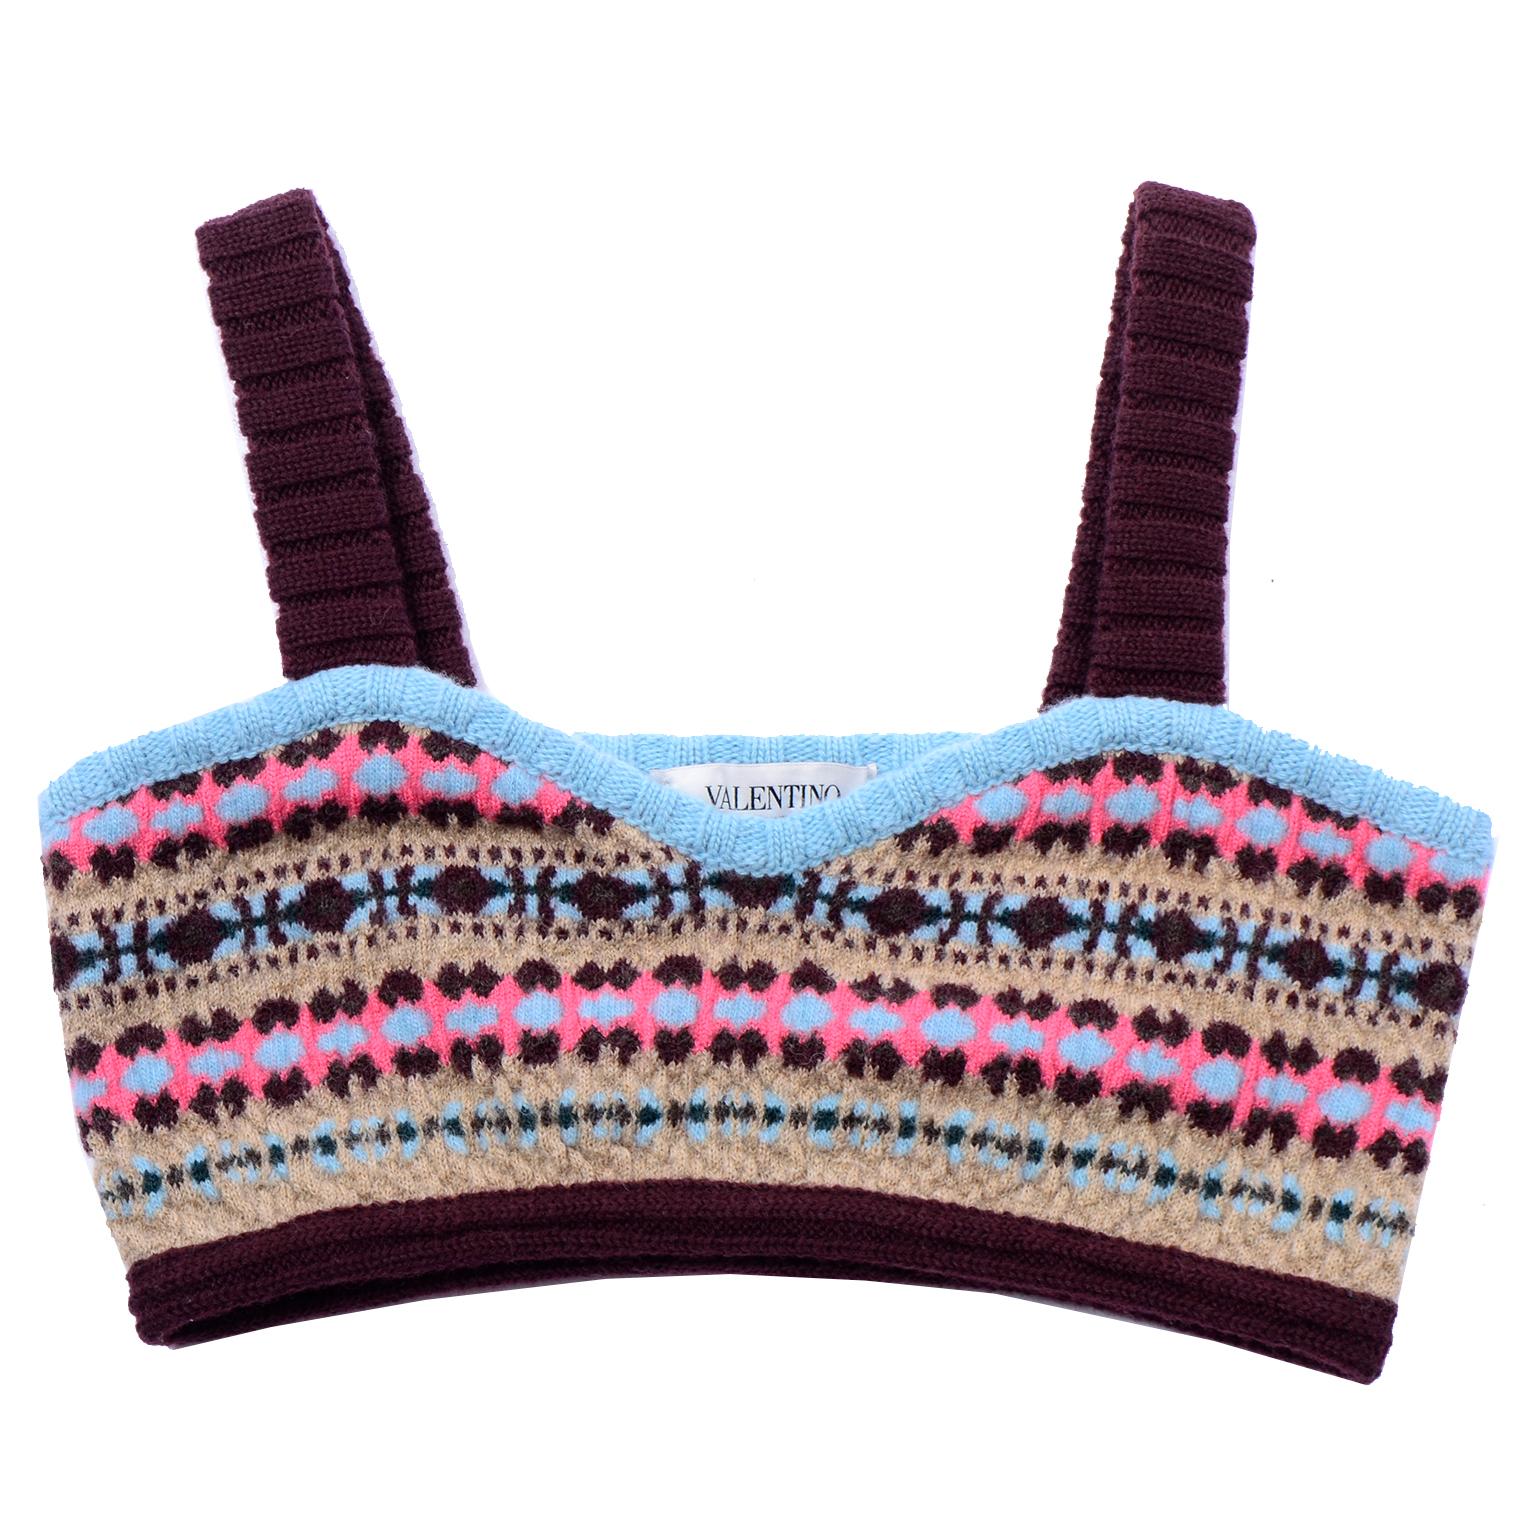 Valentino Blue Brown Pink Fair Isle Knit Bralette Crop Top Deadstock New W Tags In New Condition For Sale In Portland, OR